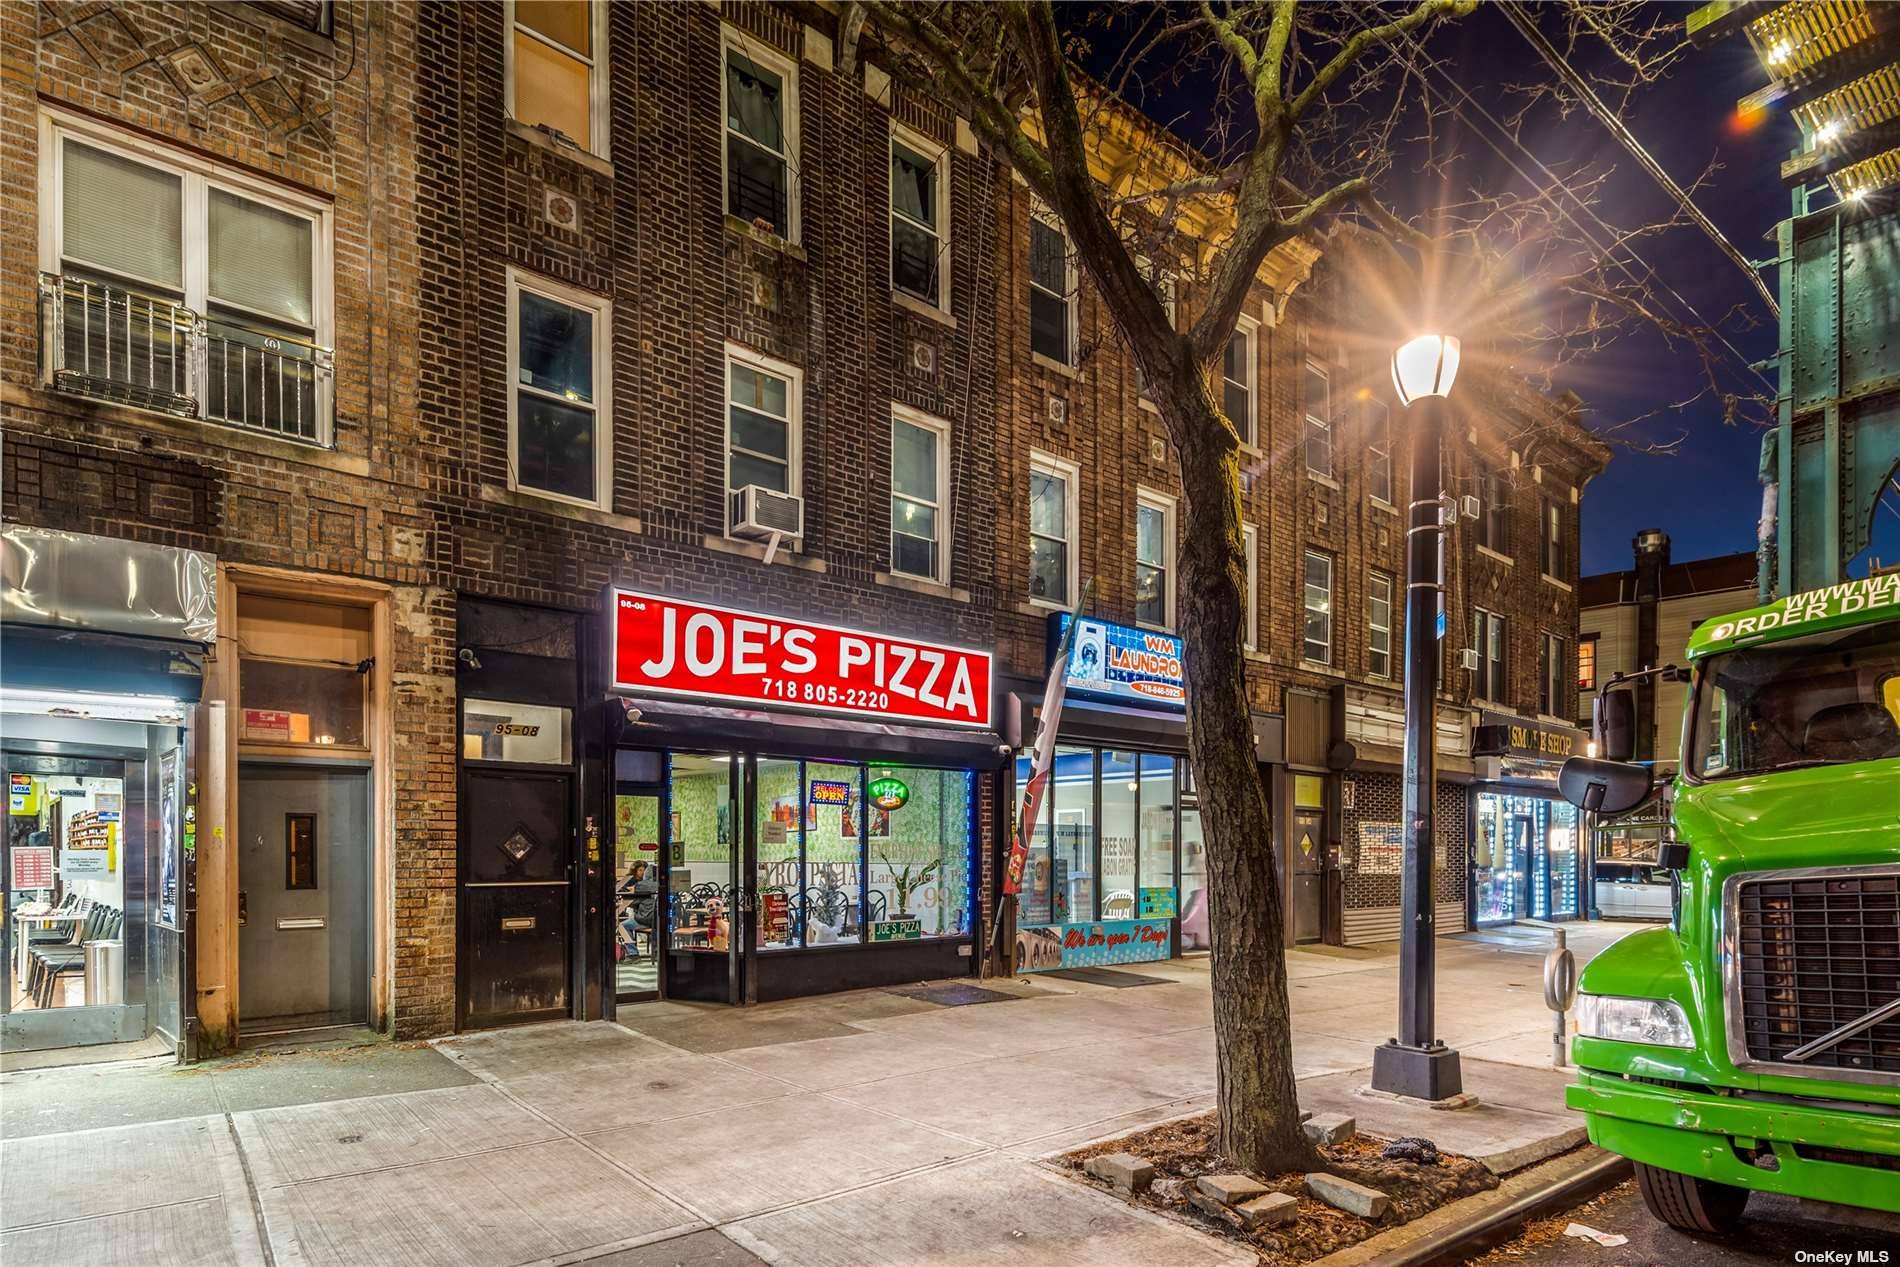 Introducing a prime real estate opportunity on the bustling Jamaica Avenue a mixed use gem that combines commercial success with residential comfort.